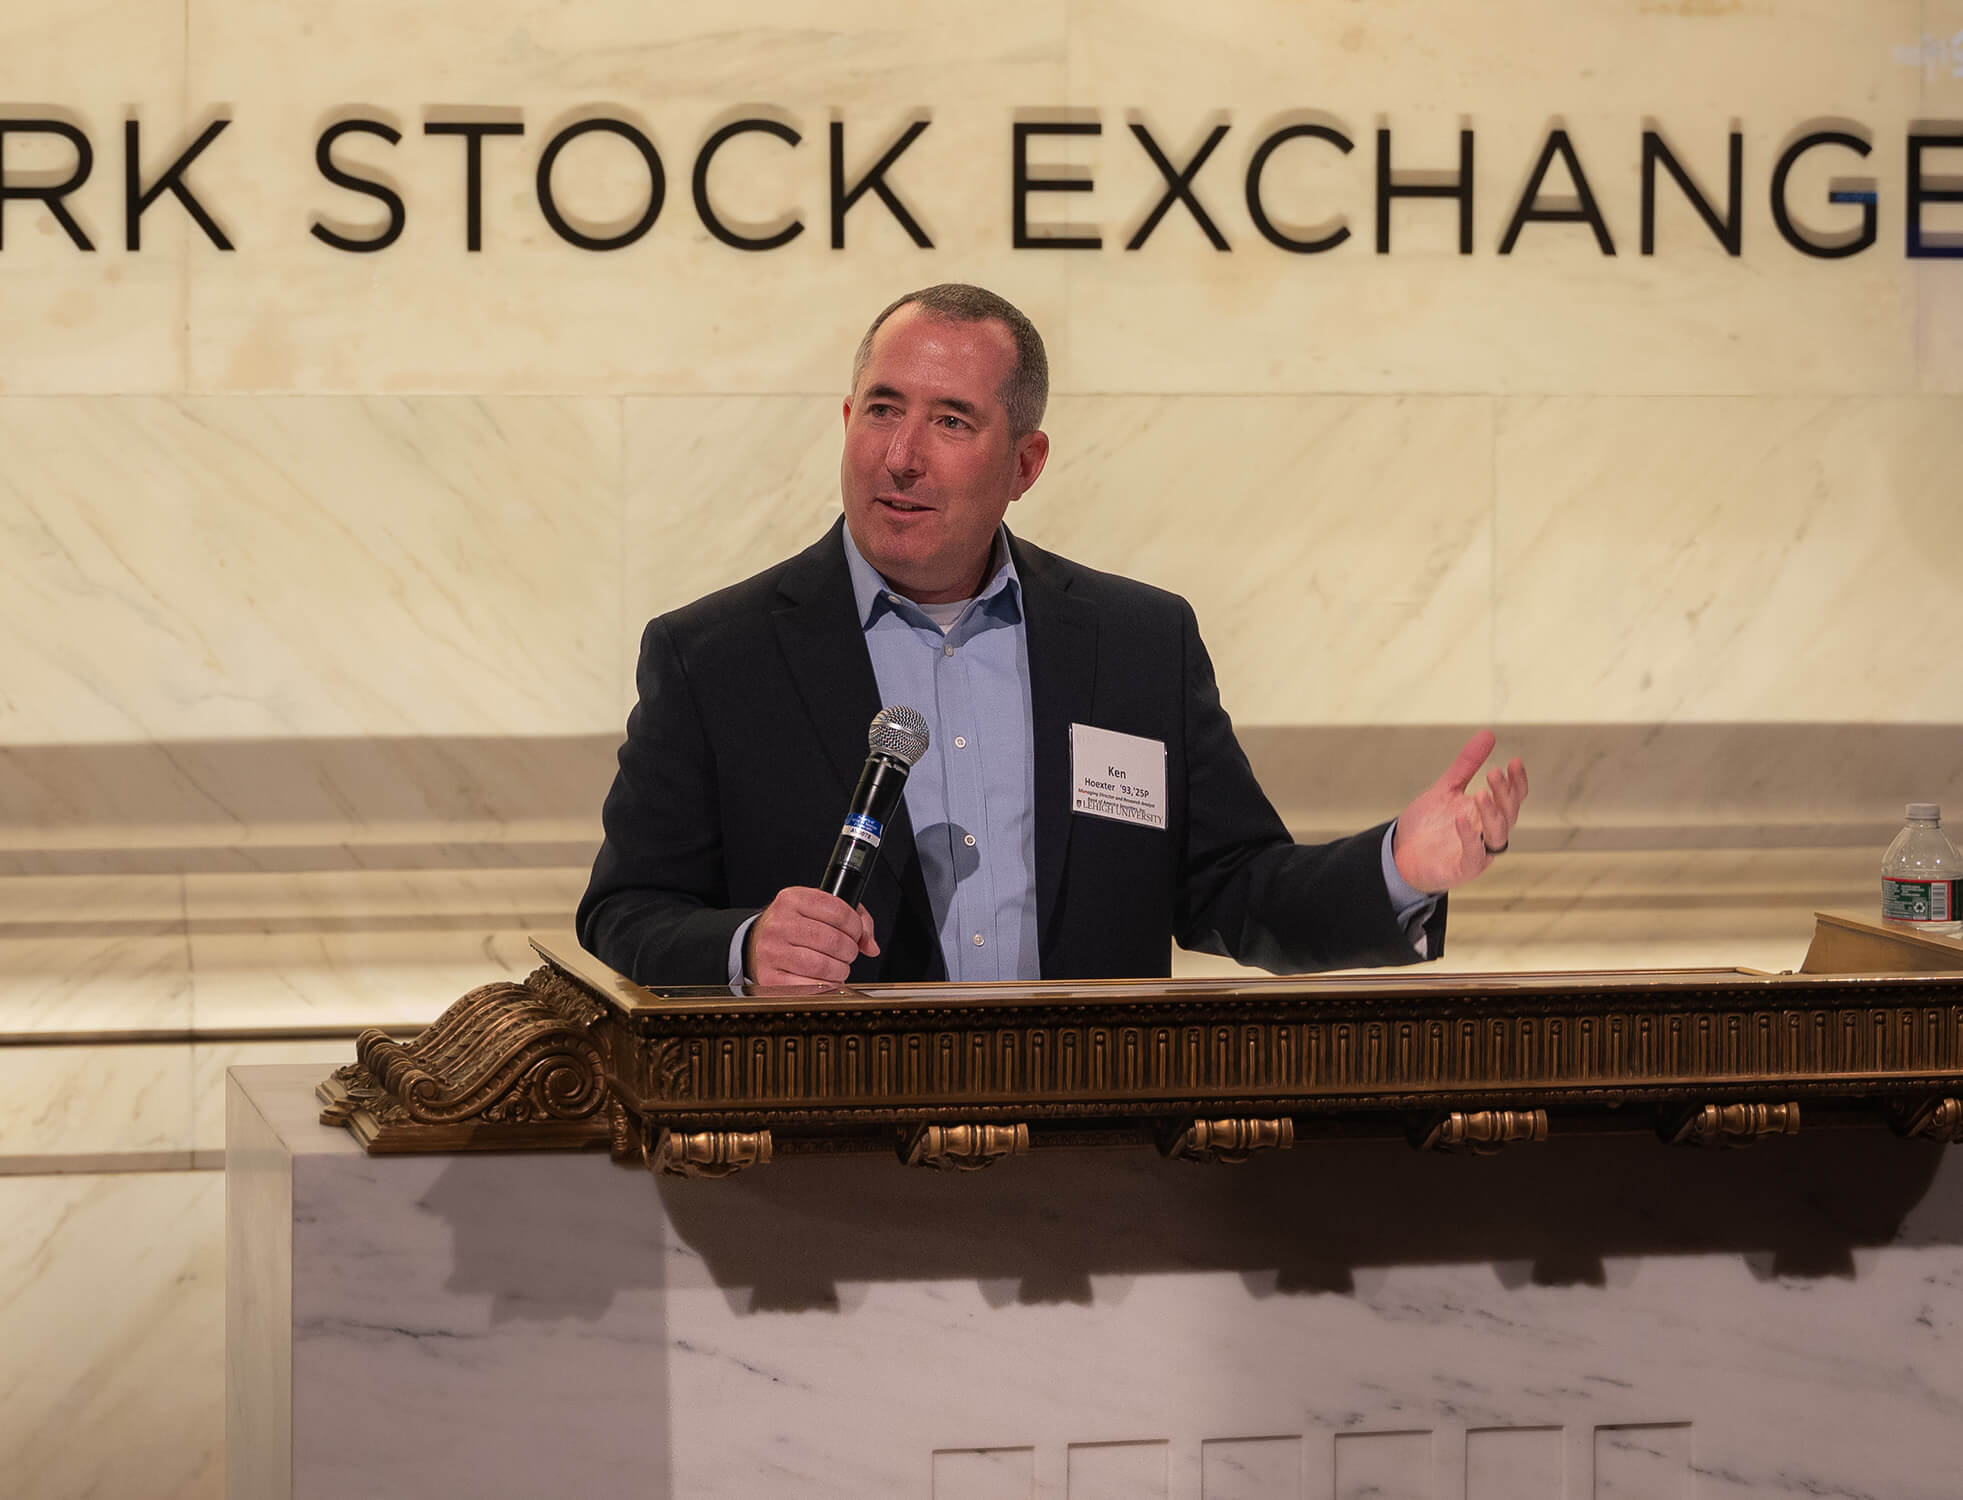 Ken Hoexter speaks at the New York Stock Exchange podium, holding a microphone in one hand and gesturing with the other.